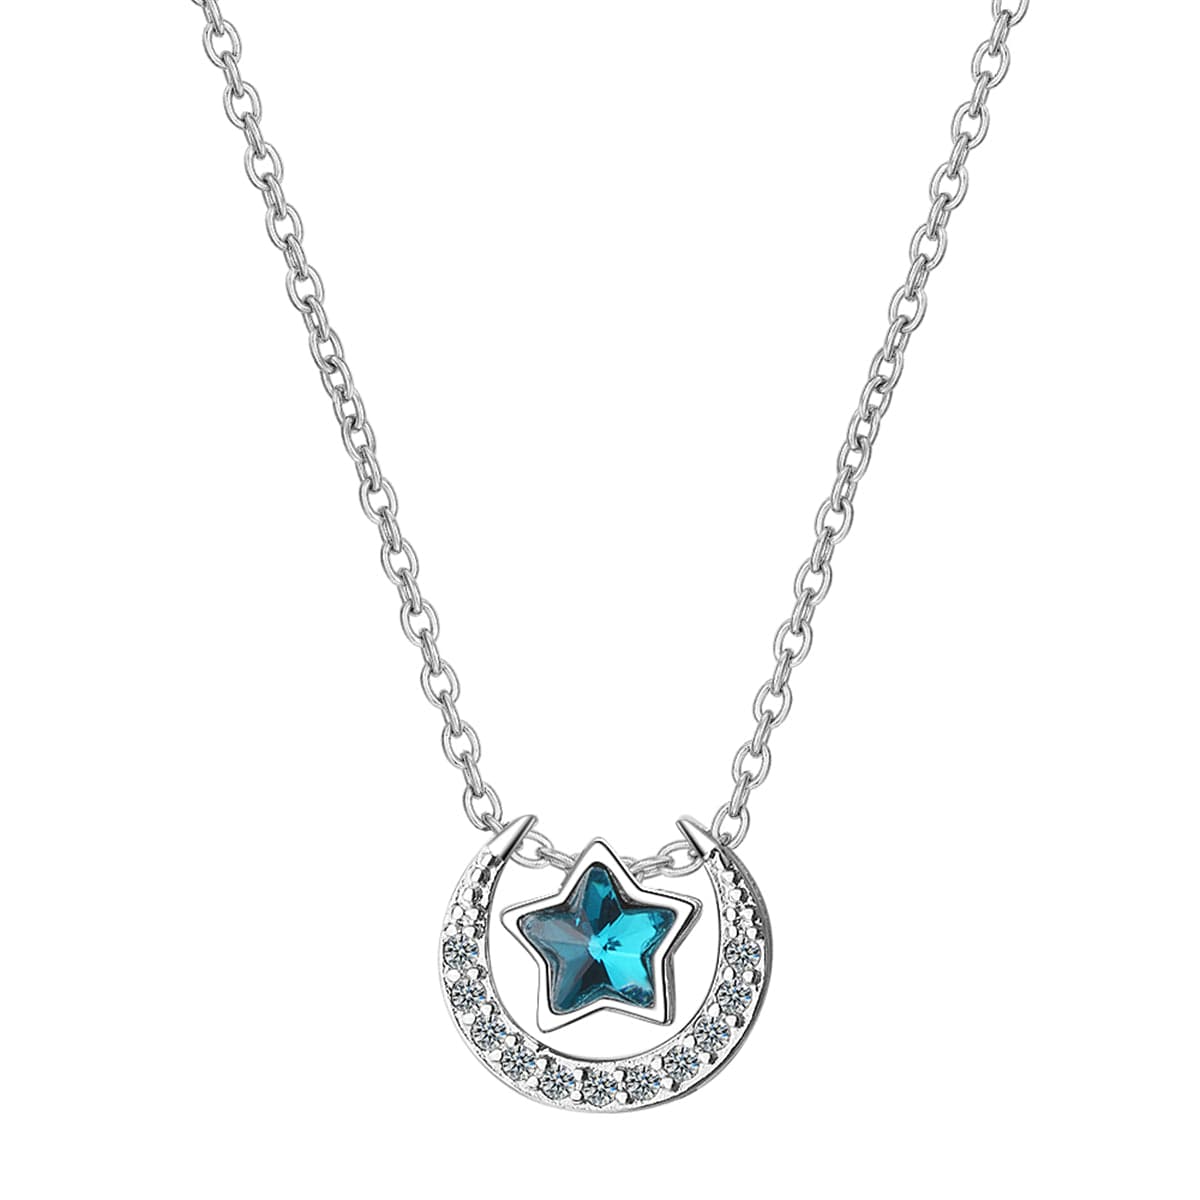 Blue Crystal & cubic zirconia Star Above Moon Pendant Necklace - streetregion